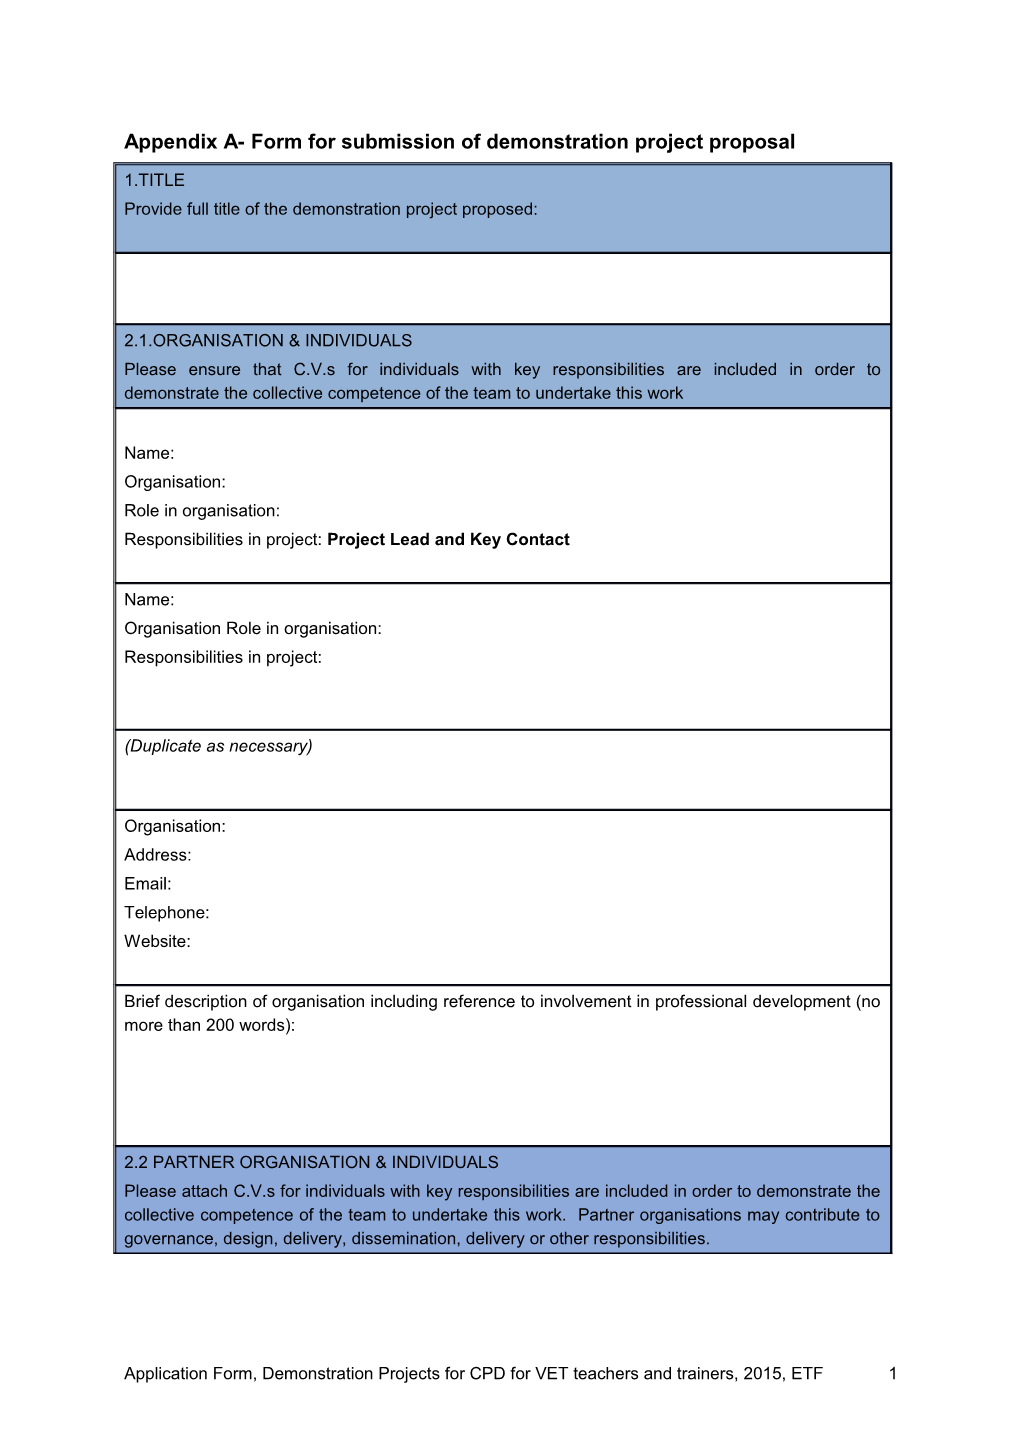 Appendix A- Form for Submission of Demonstration Project Proposal